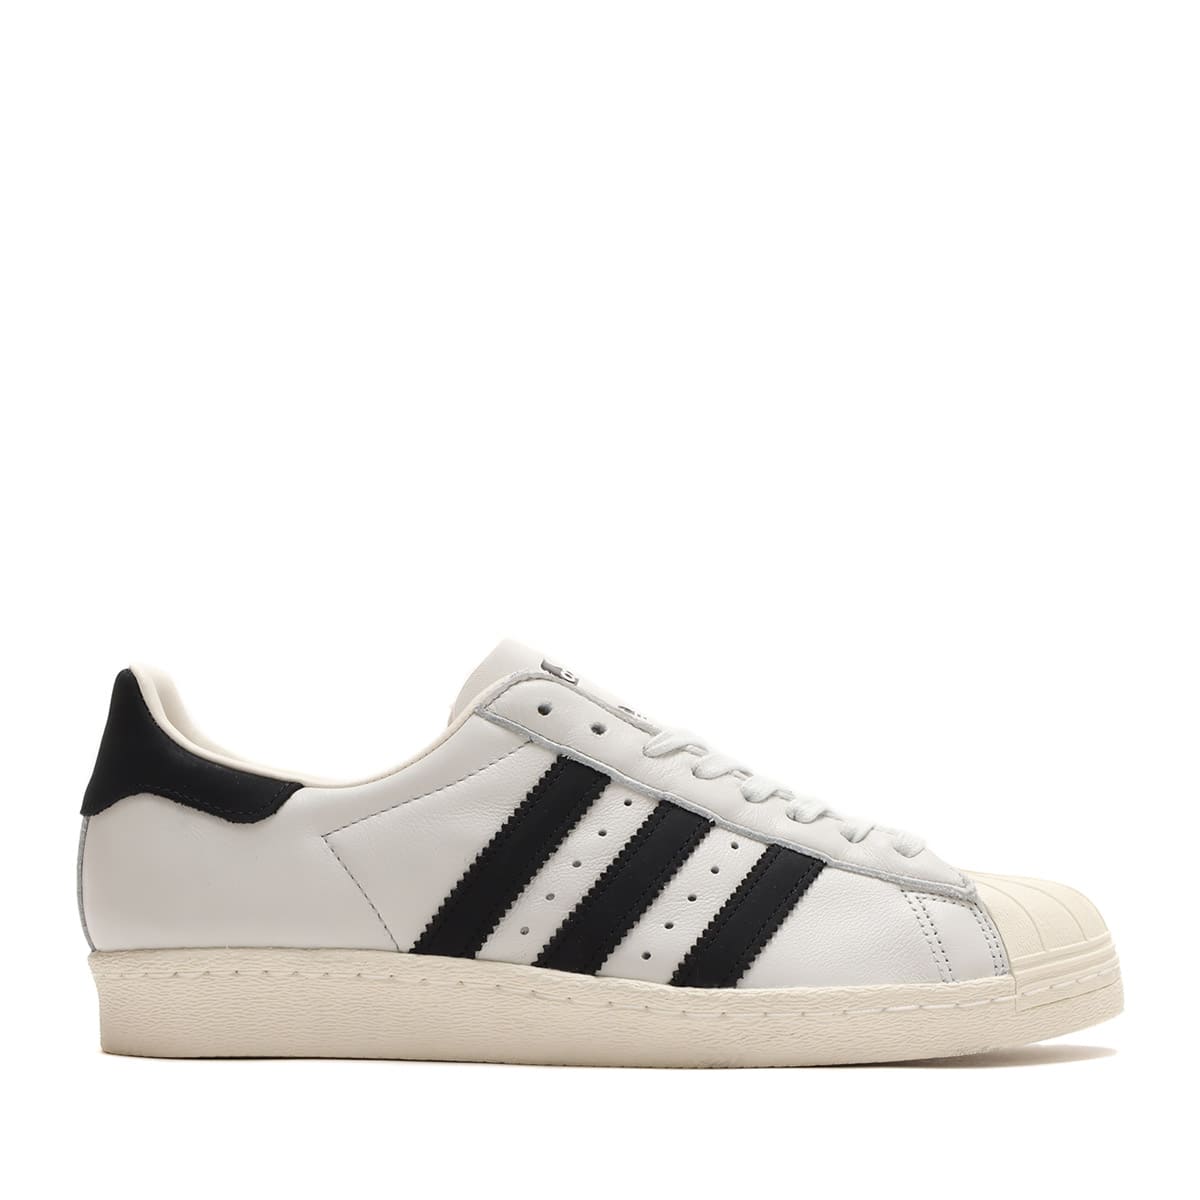 adidas SUPERSTAR RECON CRYSTAL WHITE/OFF WHITE/CORE BLACK 21FW-S